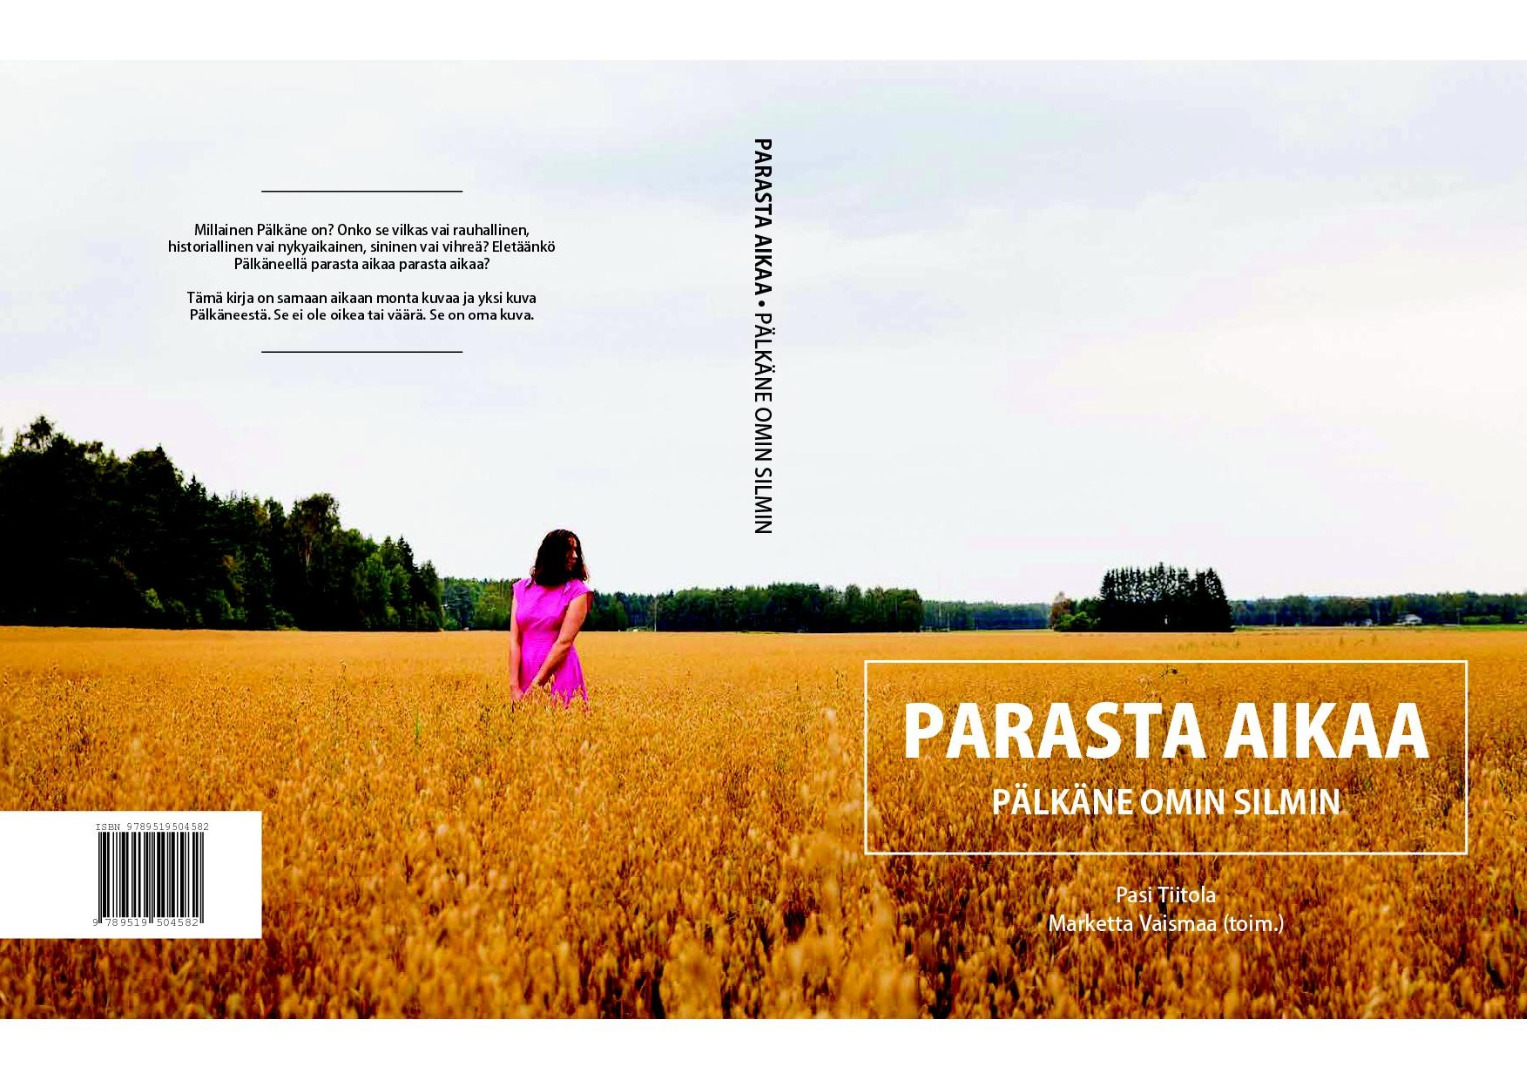 a logo that has a woman standing in a beautiful wheat field